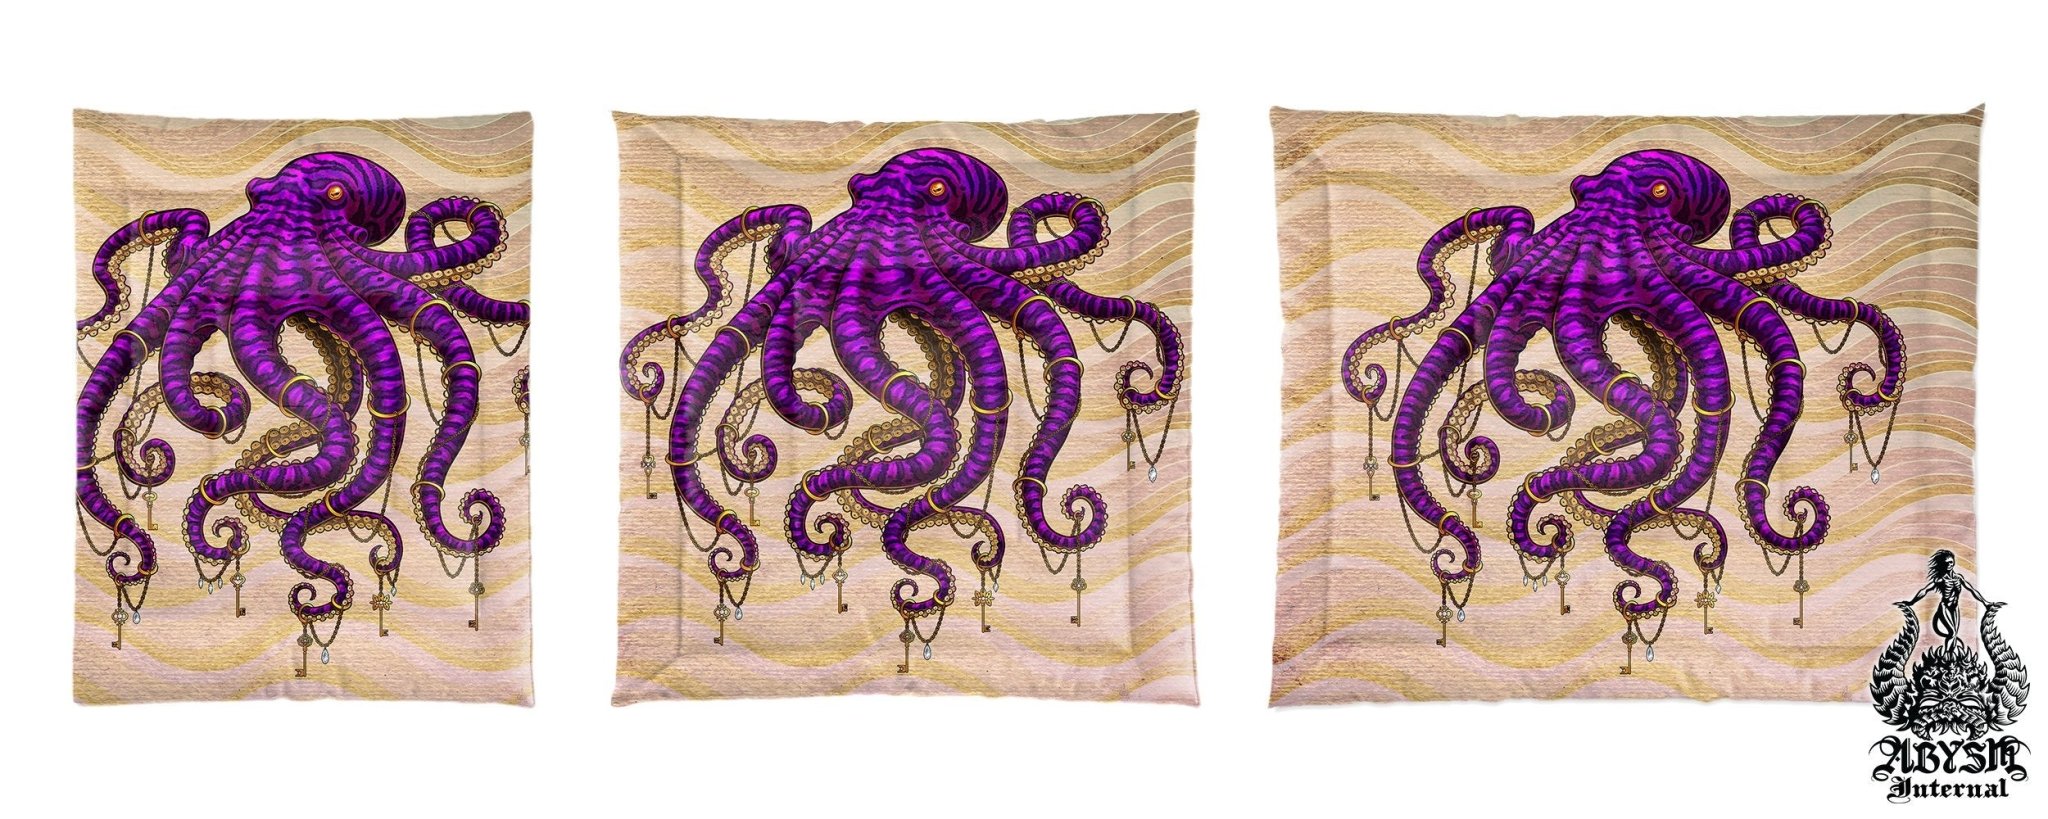 Octopus Bedding Set, Comforter and Duvet, Beach Bed Cover, Coastal Bedroom Decor, King, Queen and Twin Size - Purple - Abysm Internal